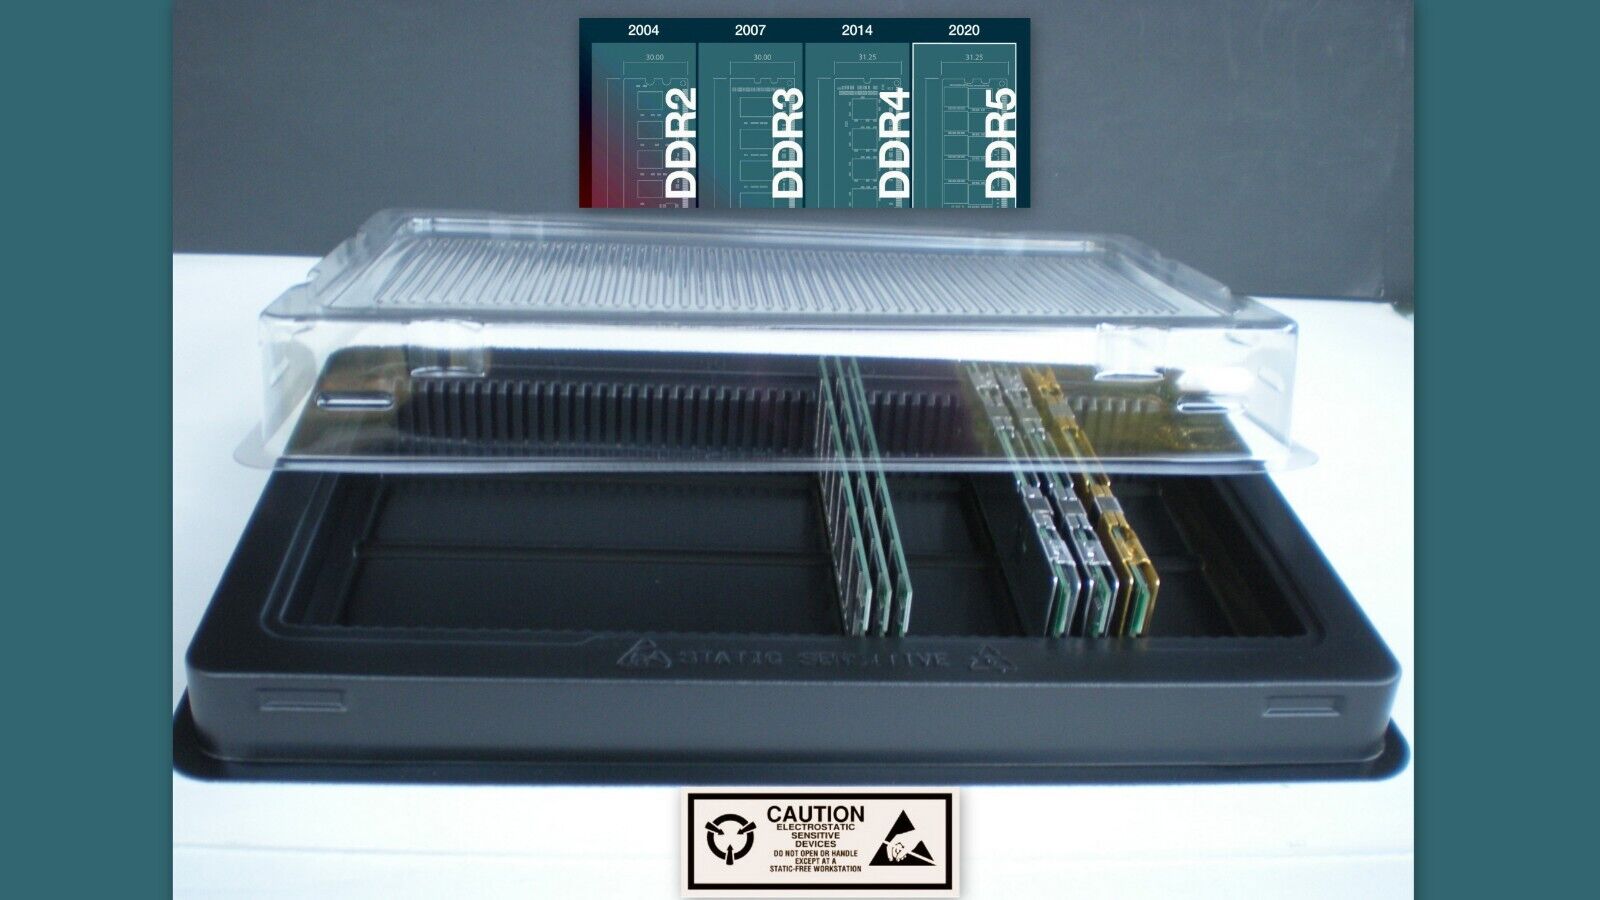 5 Server DDR Memory Case Box Trays Fits up to 250 DDR4 DDR3 DDR2 DDR5 DIMM - New